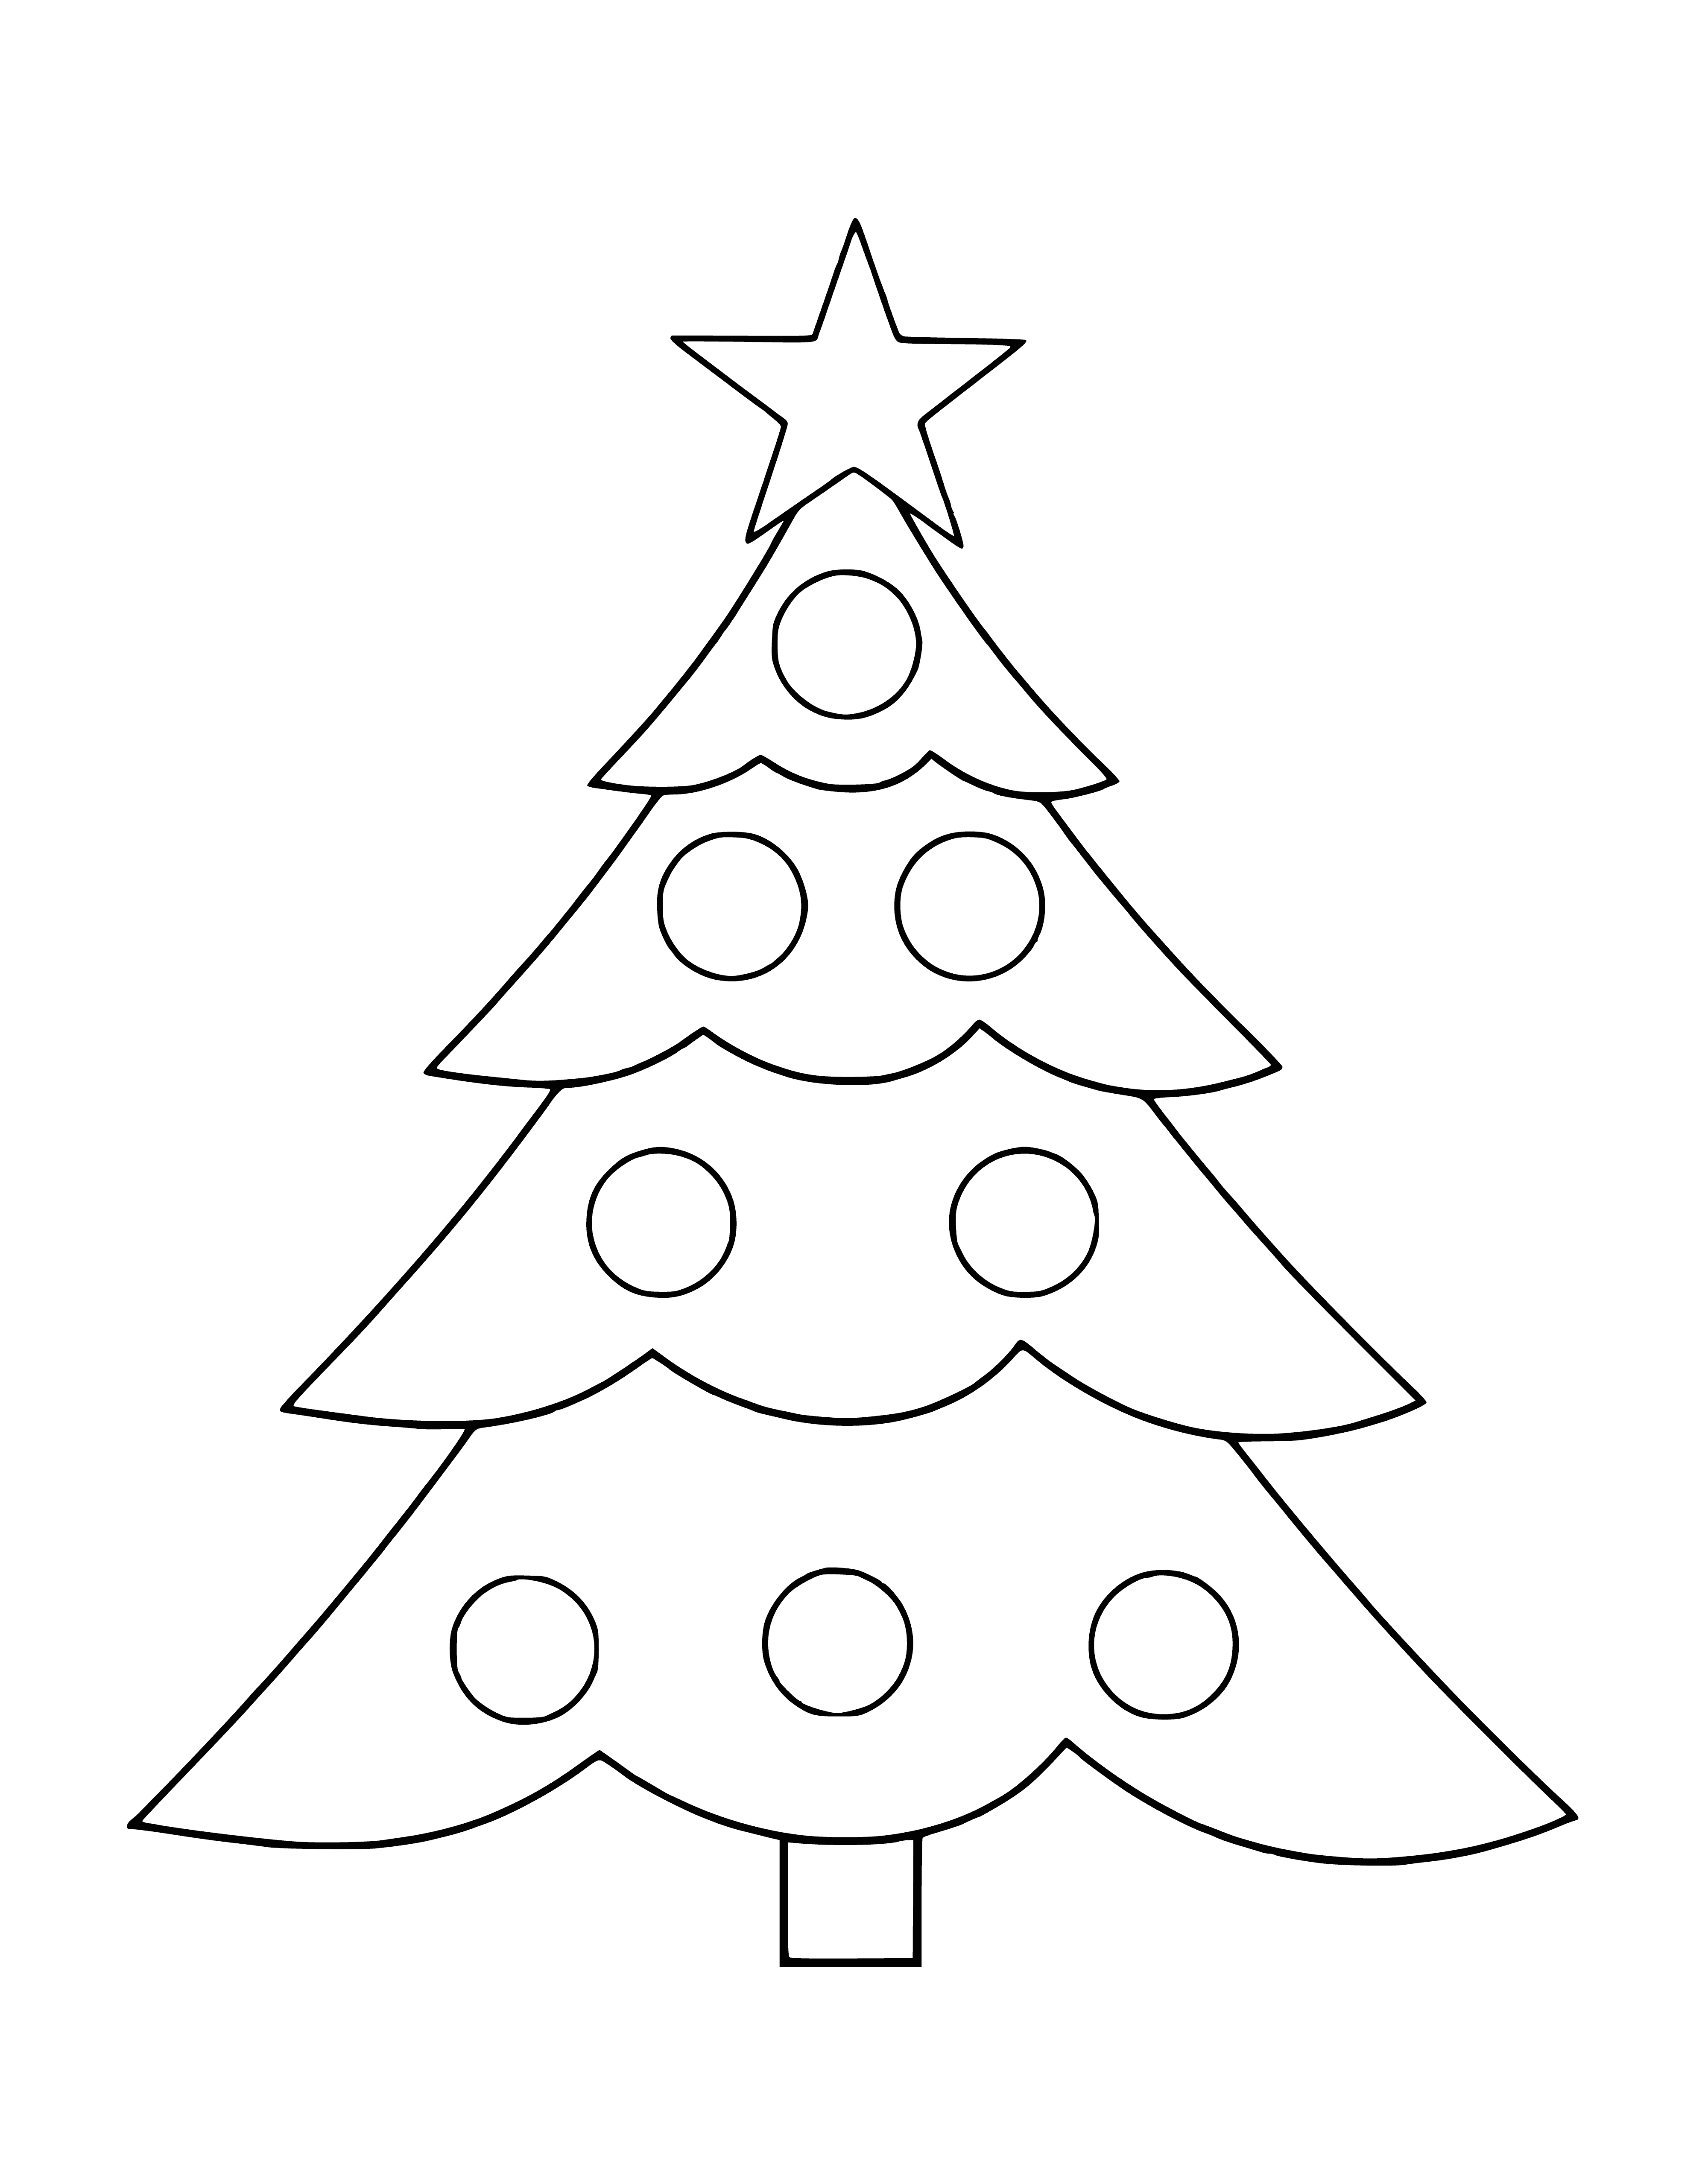 coloring page: A festive golden Christmas tree adorned with ornaments & wrapped in a gold ribbon—all in one coloring page!